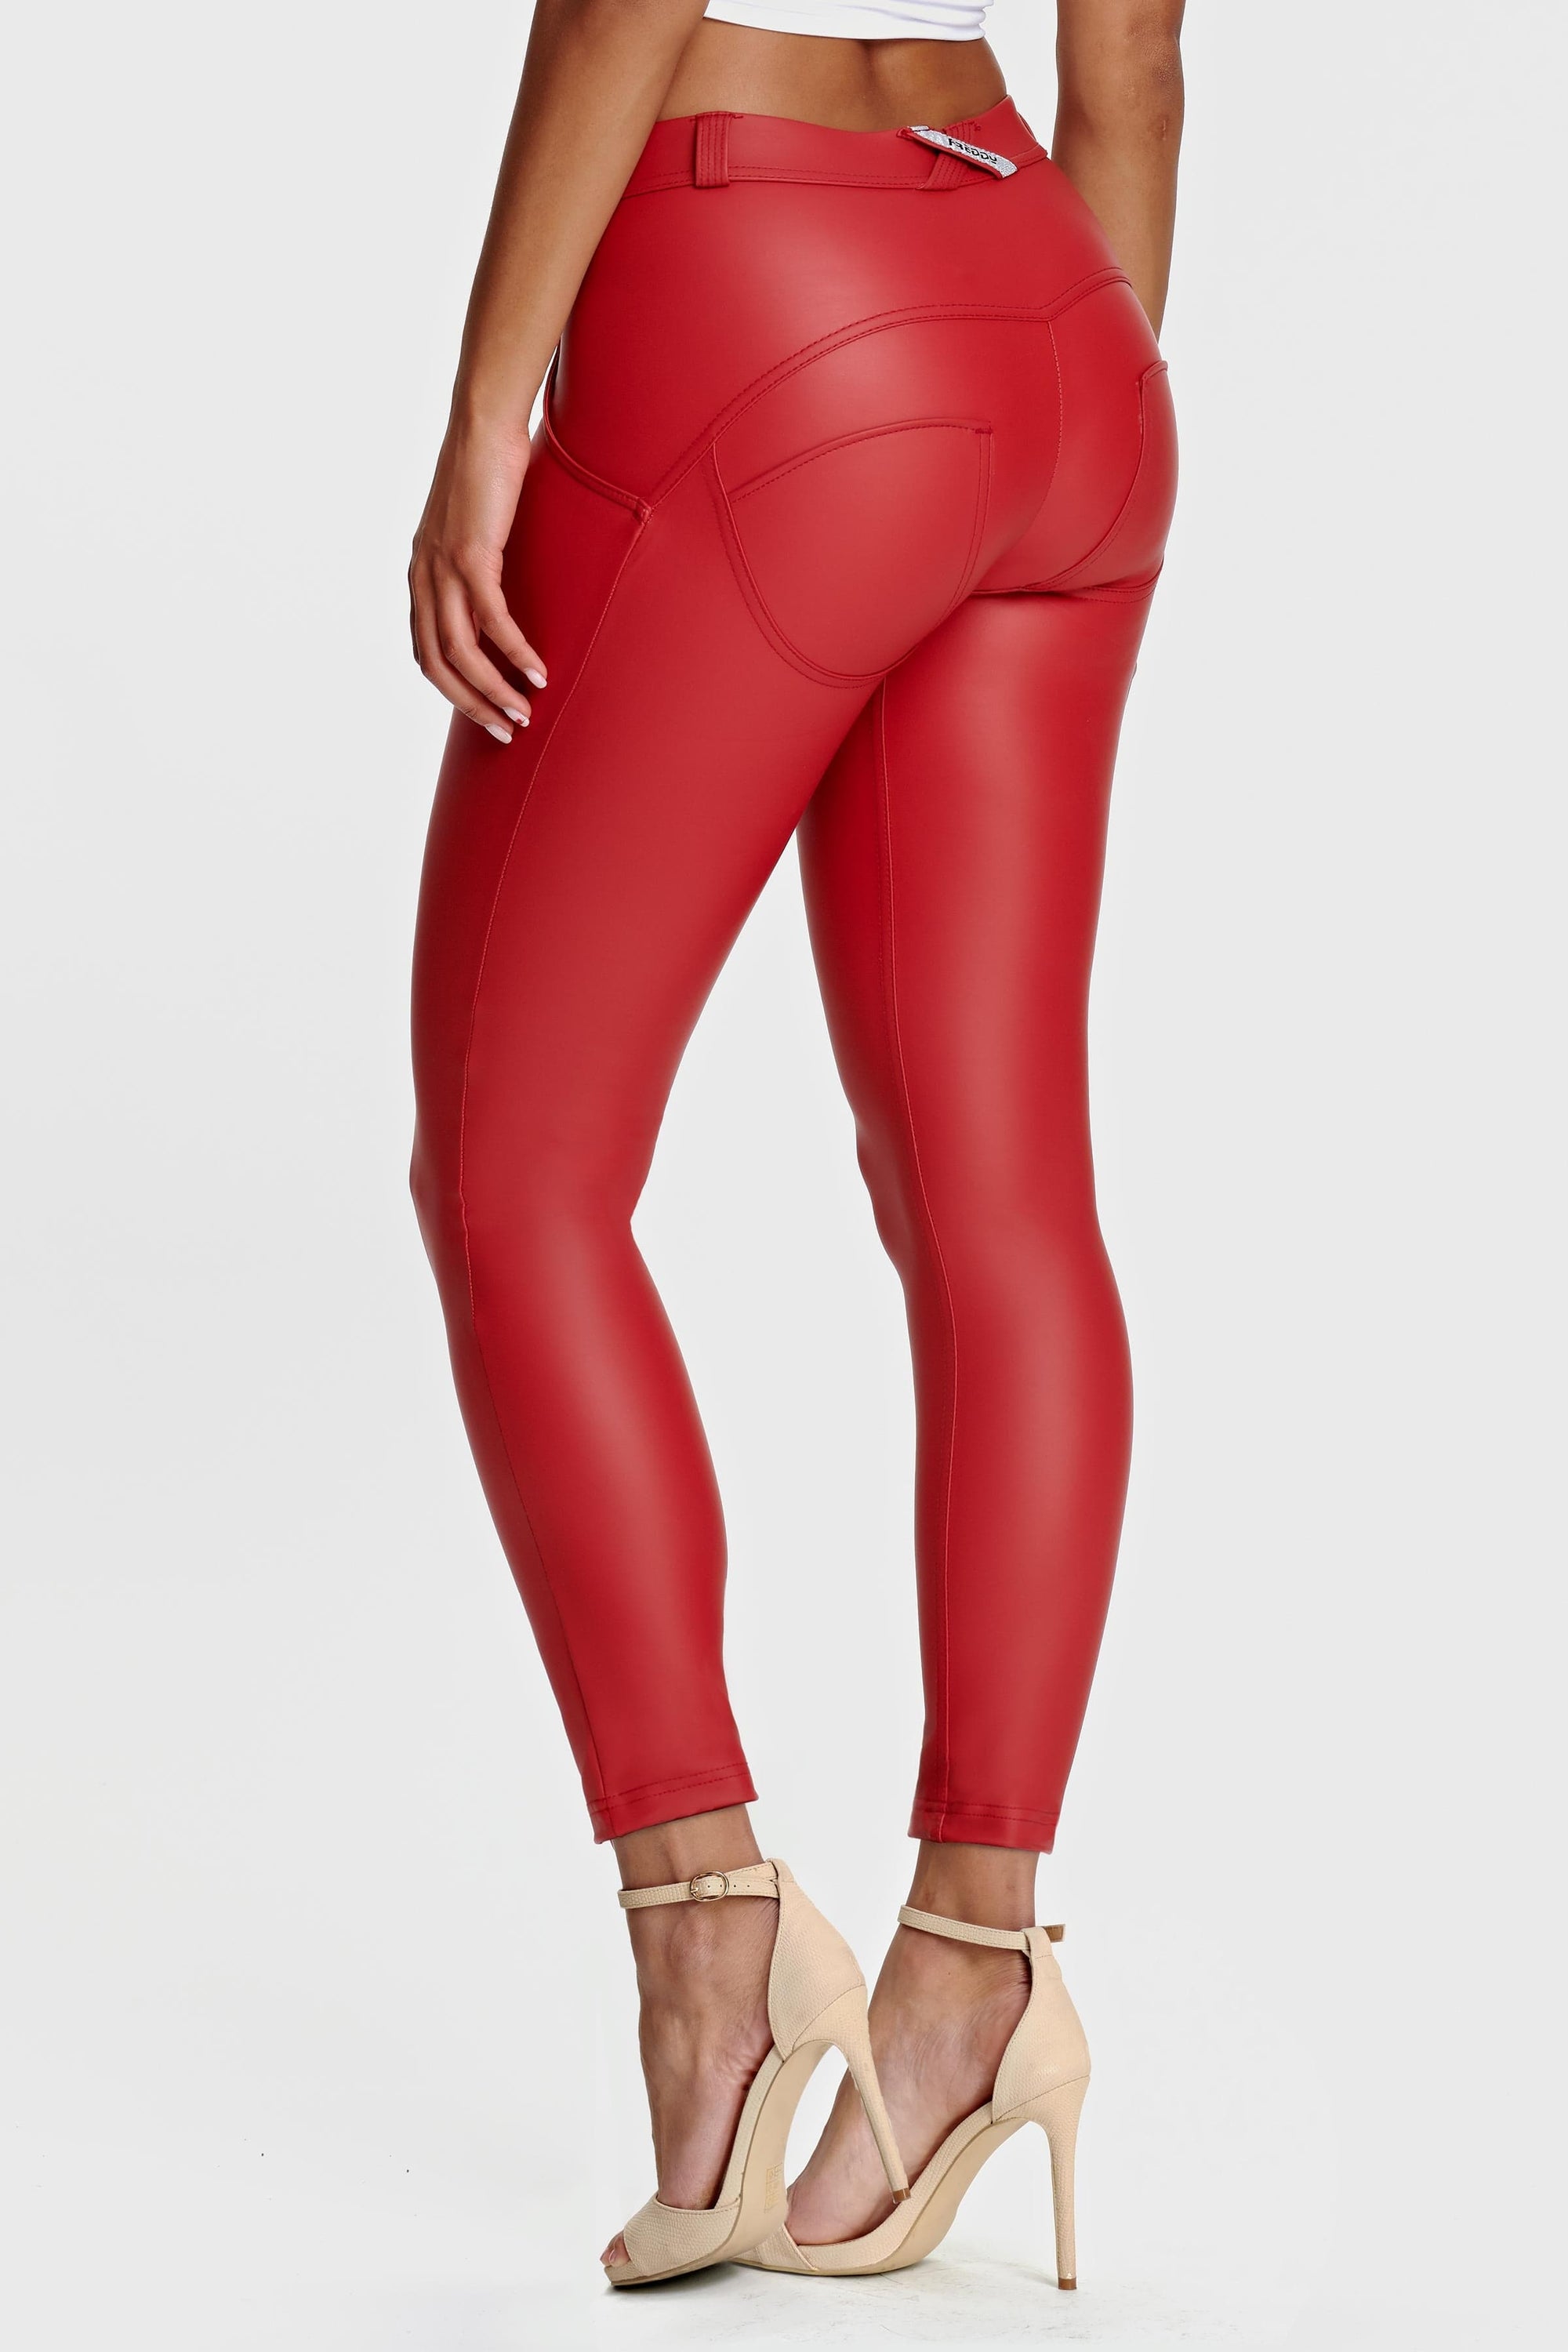 WR.UP® Faux Leather - Mid Rise - Petite Length - Red 6